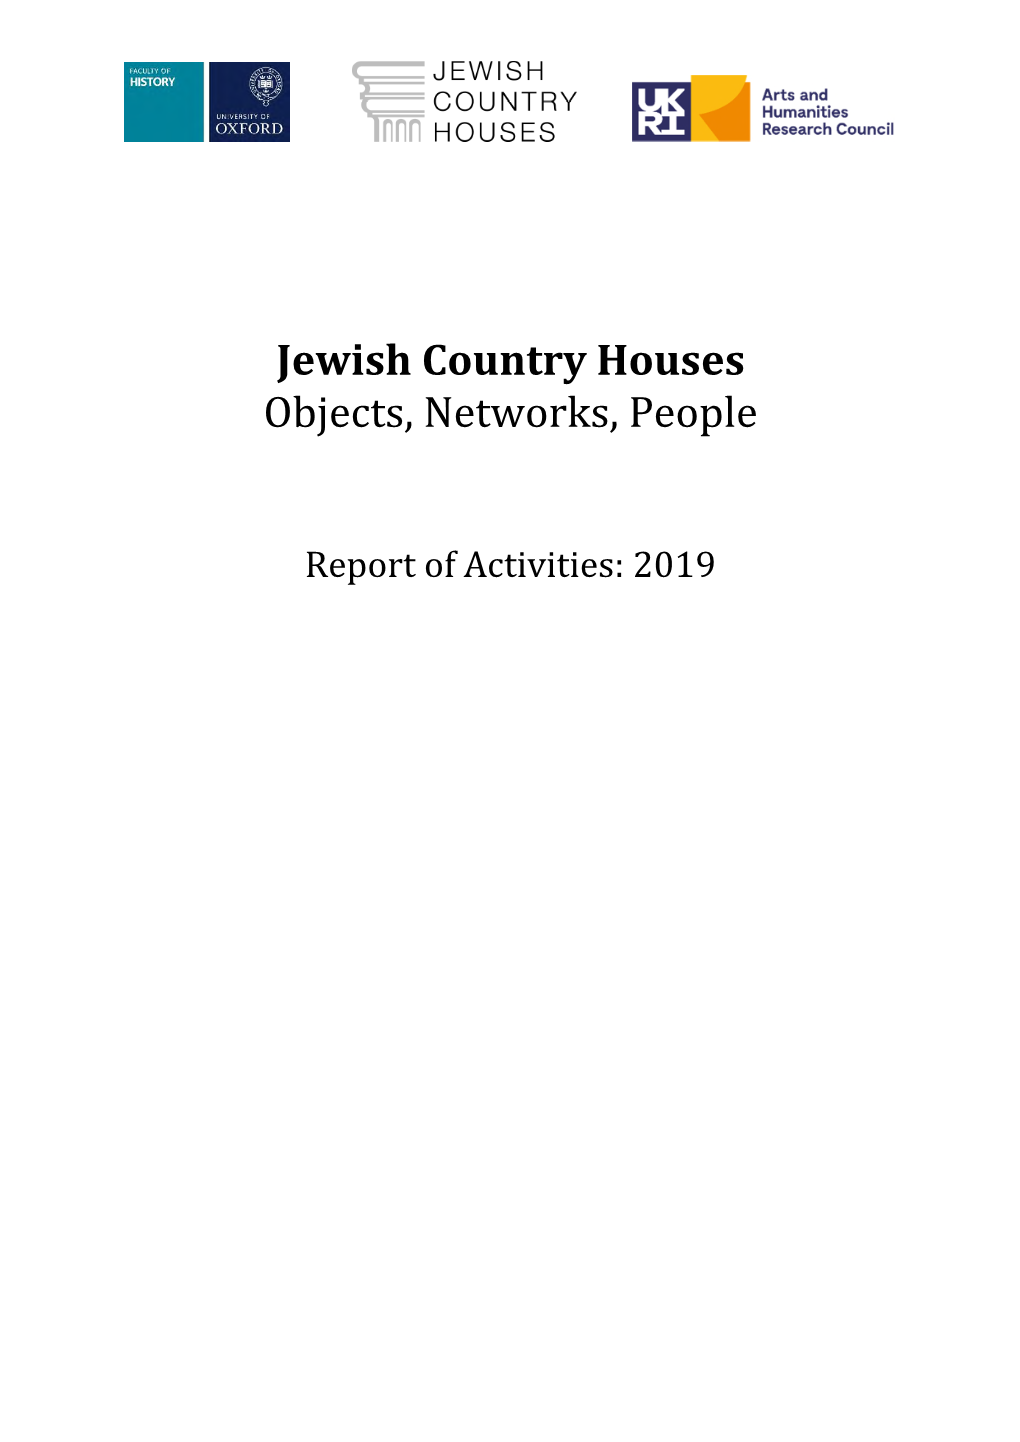 Jewish Country Houses Objects, Networks, People